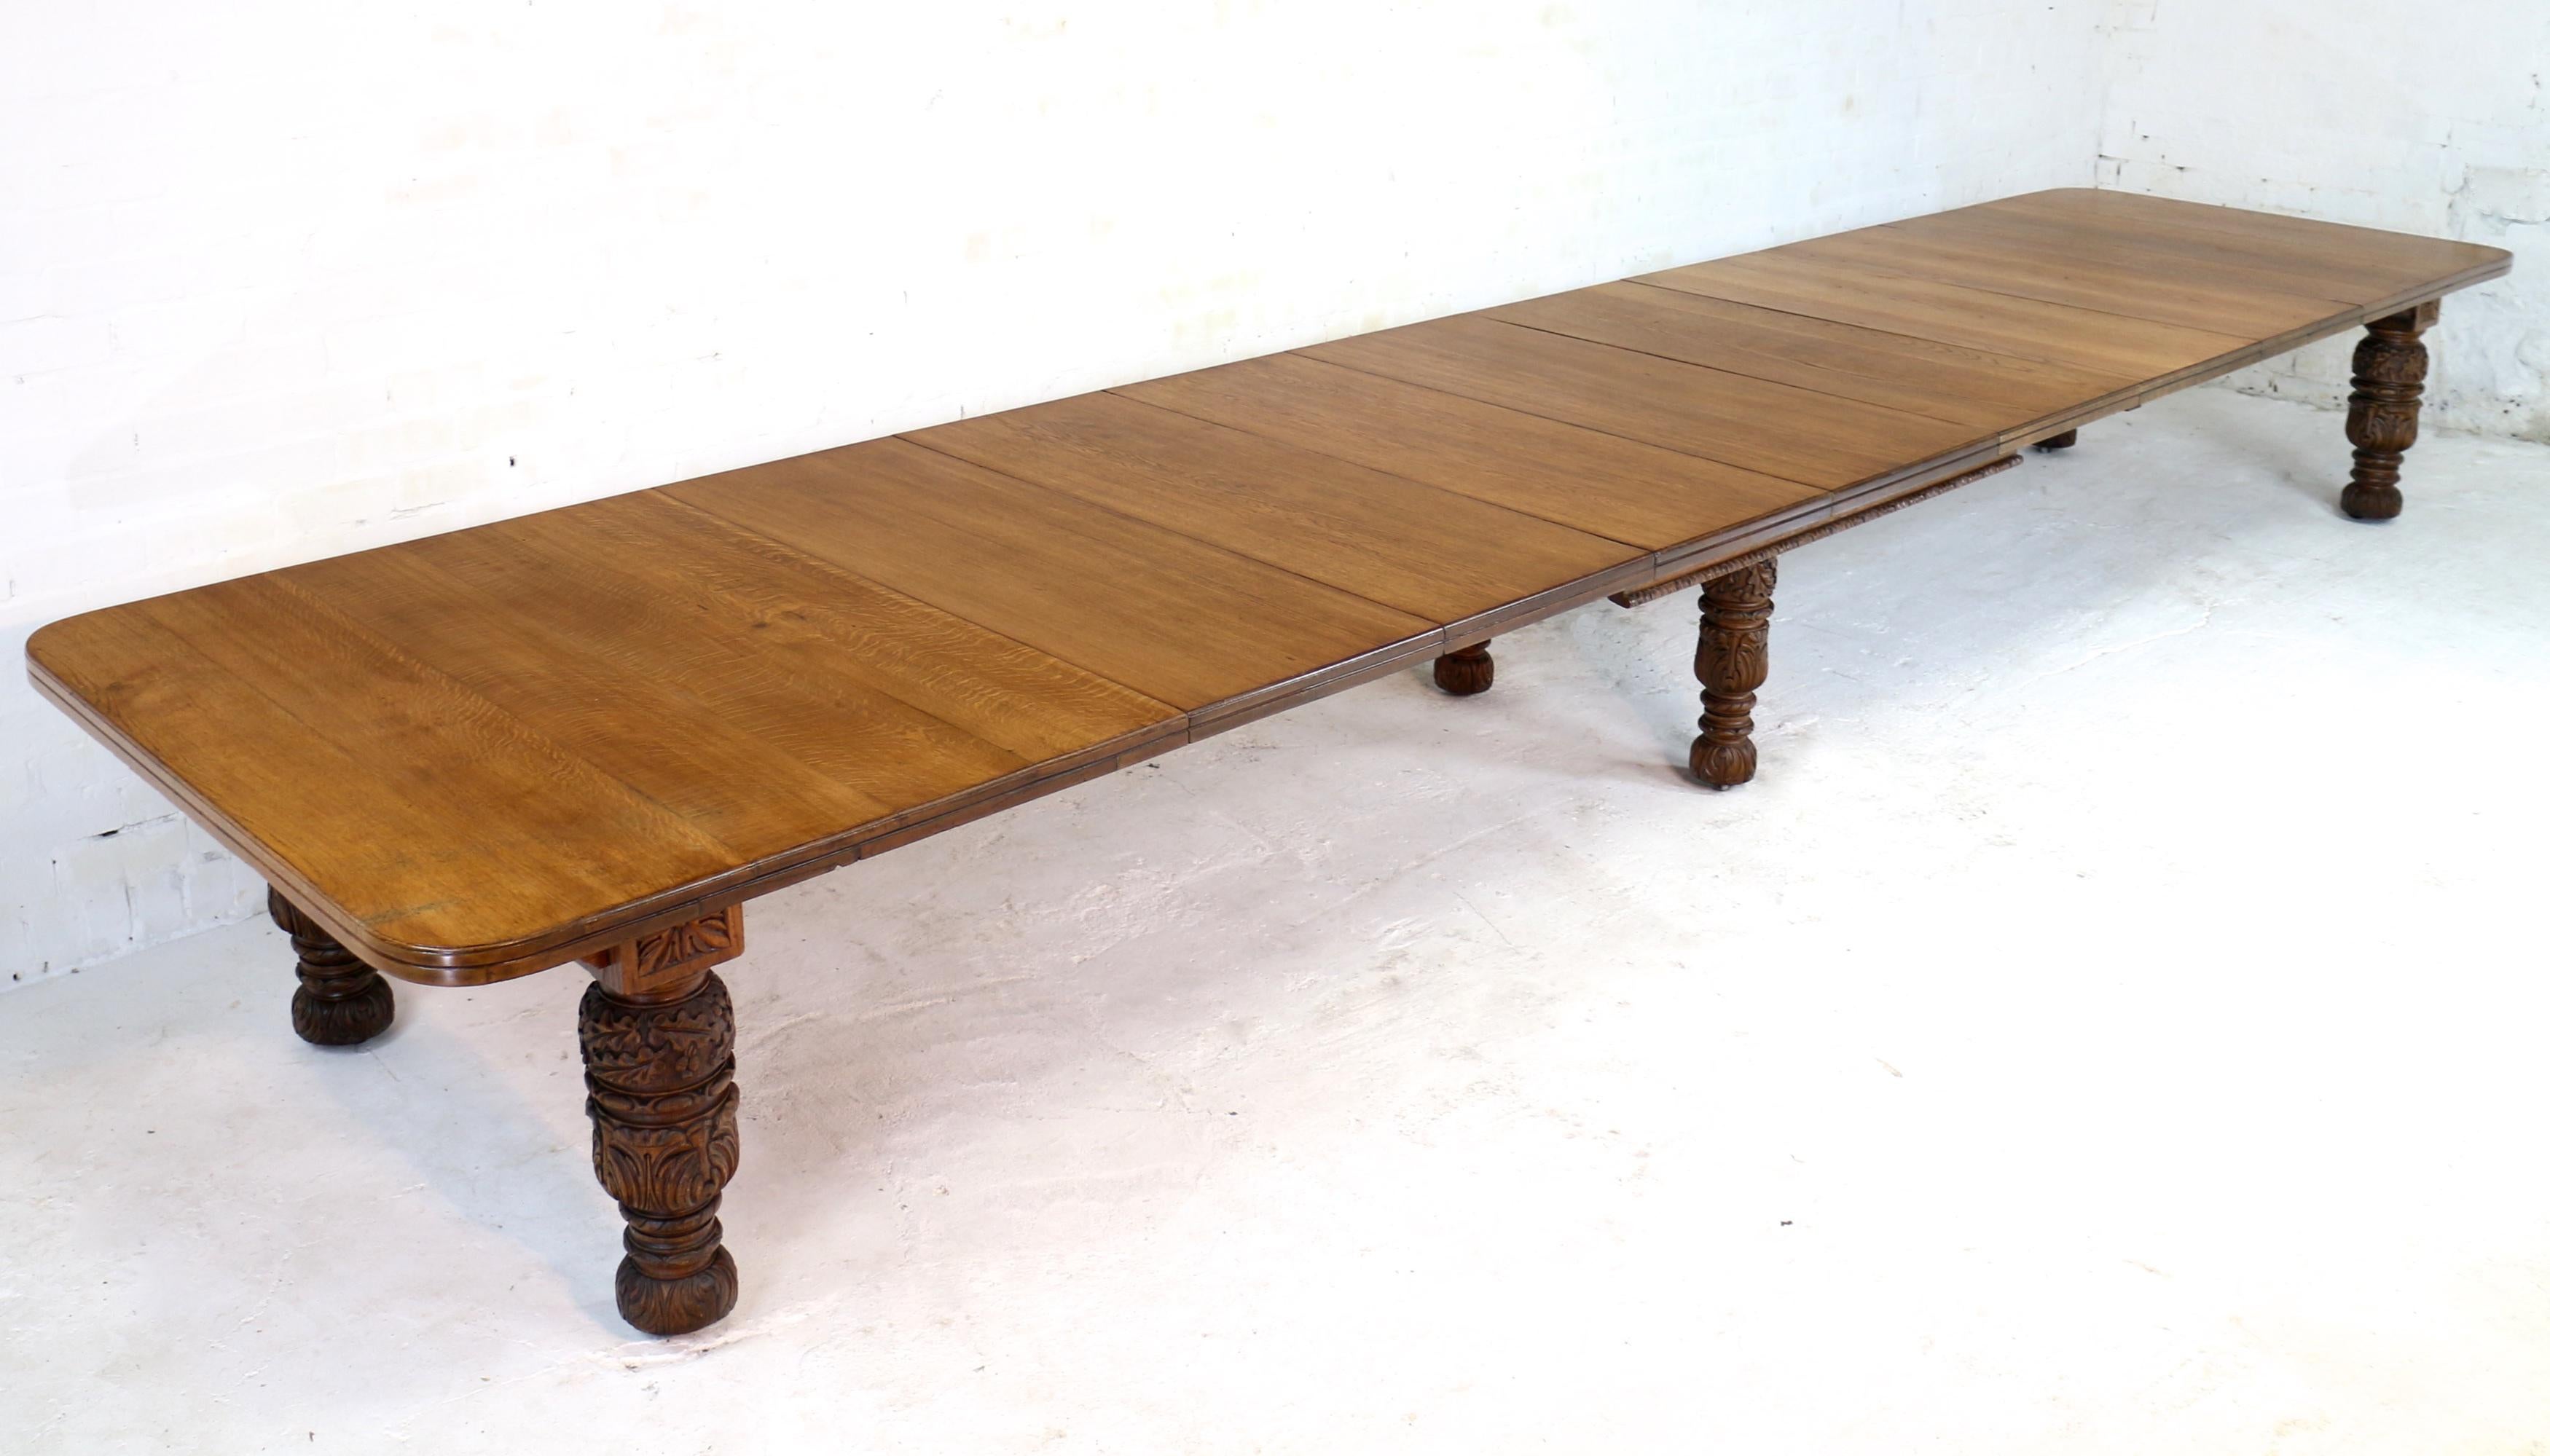 Magnificent Edward & Roberts Victorian wind-out extending dining table in golden quarter-sawn oak and with seven leaves. In the Jacobean Revival style this large 54in wide table smoothly extends from 7ft 4.5in to 20ft using a double Joseph Fitter